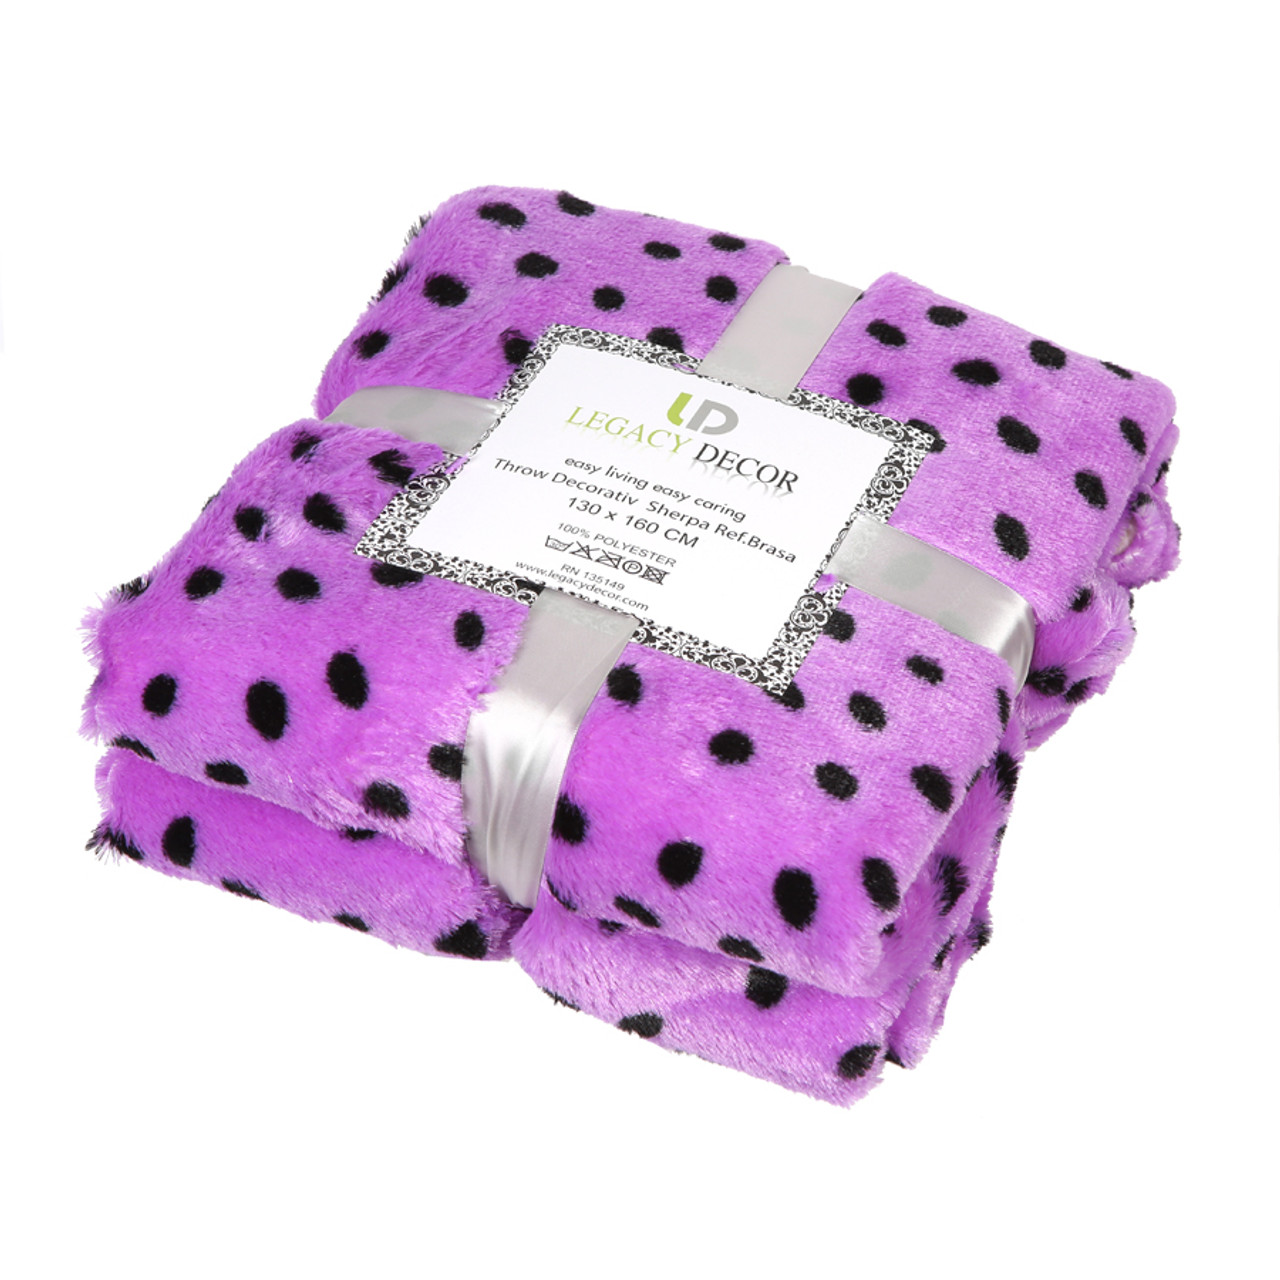 Luxurious Ultra Soft Throw Blanket with Super Cozy Sherpa on backside, Purple w/ Black Polka Dots 50”x 61” 